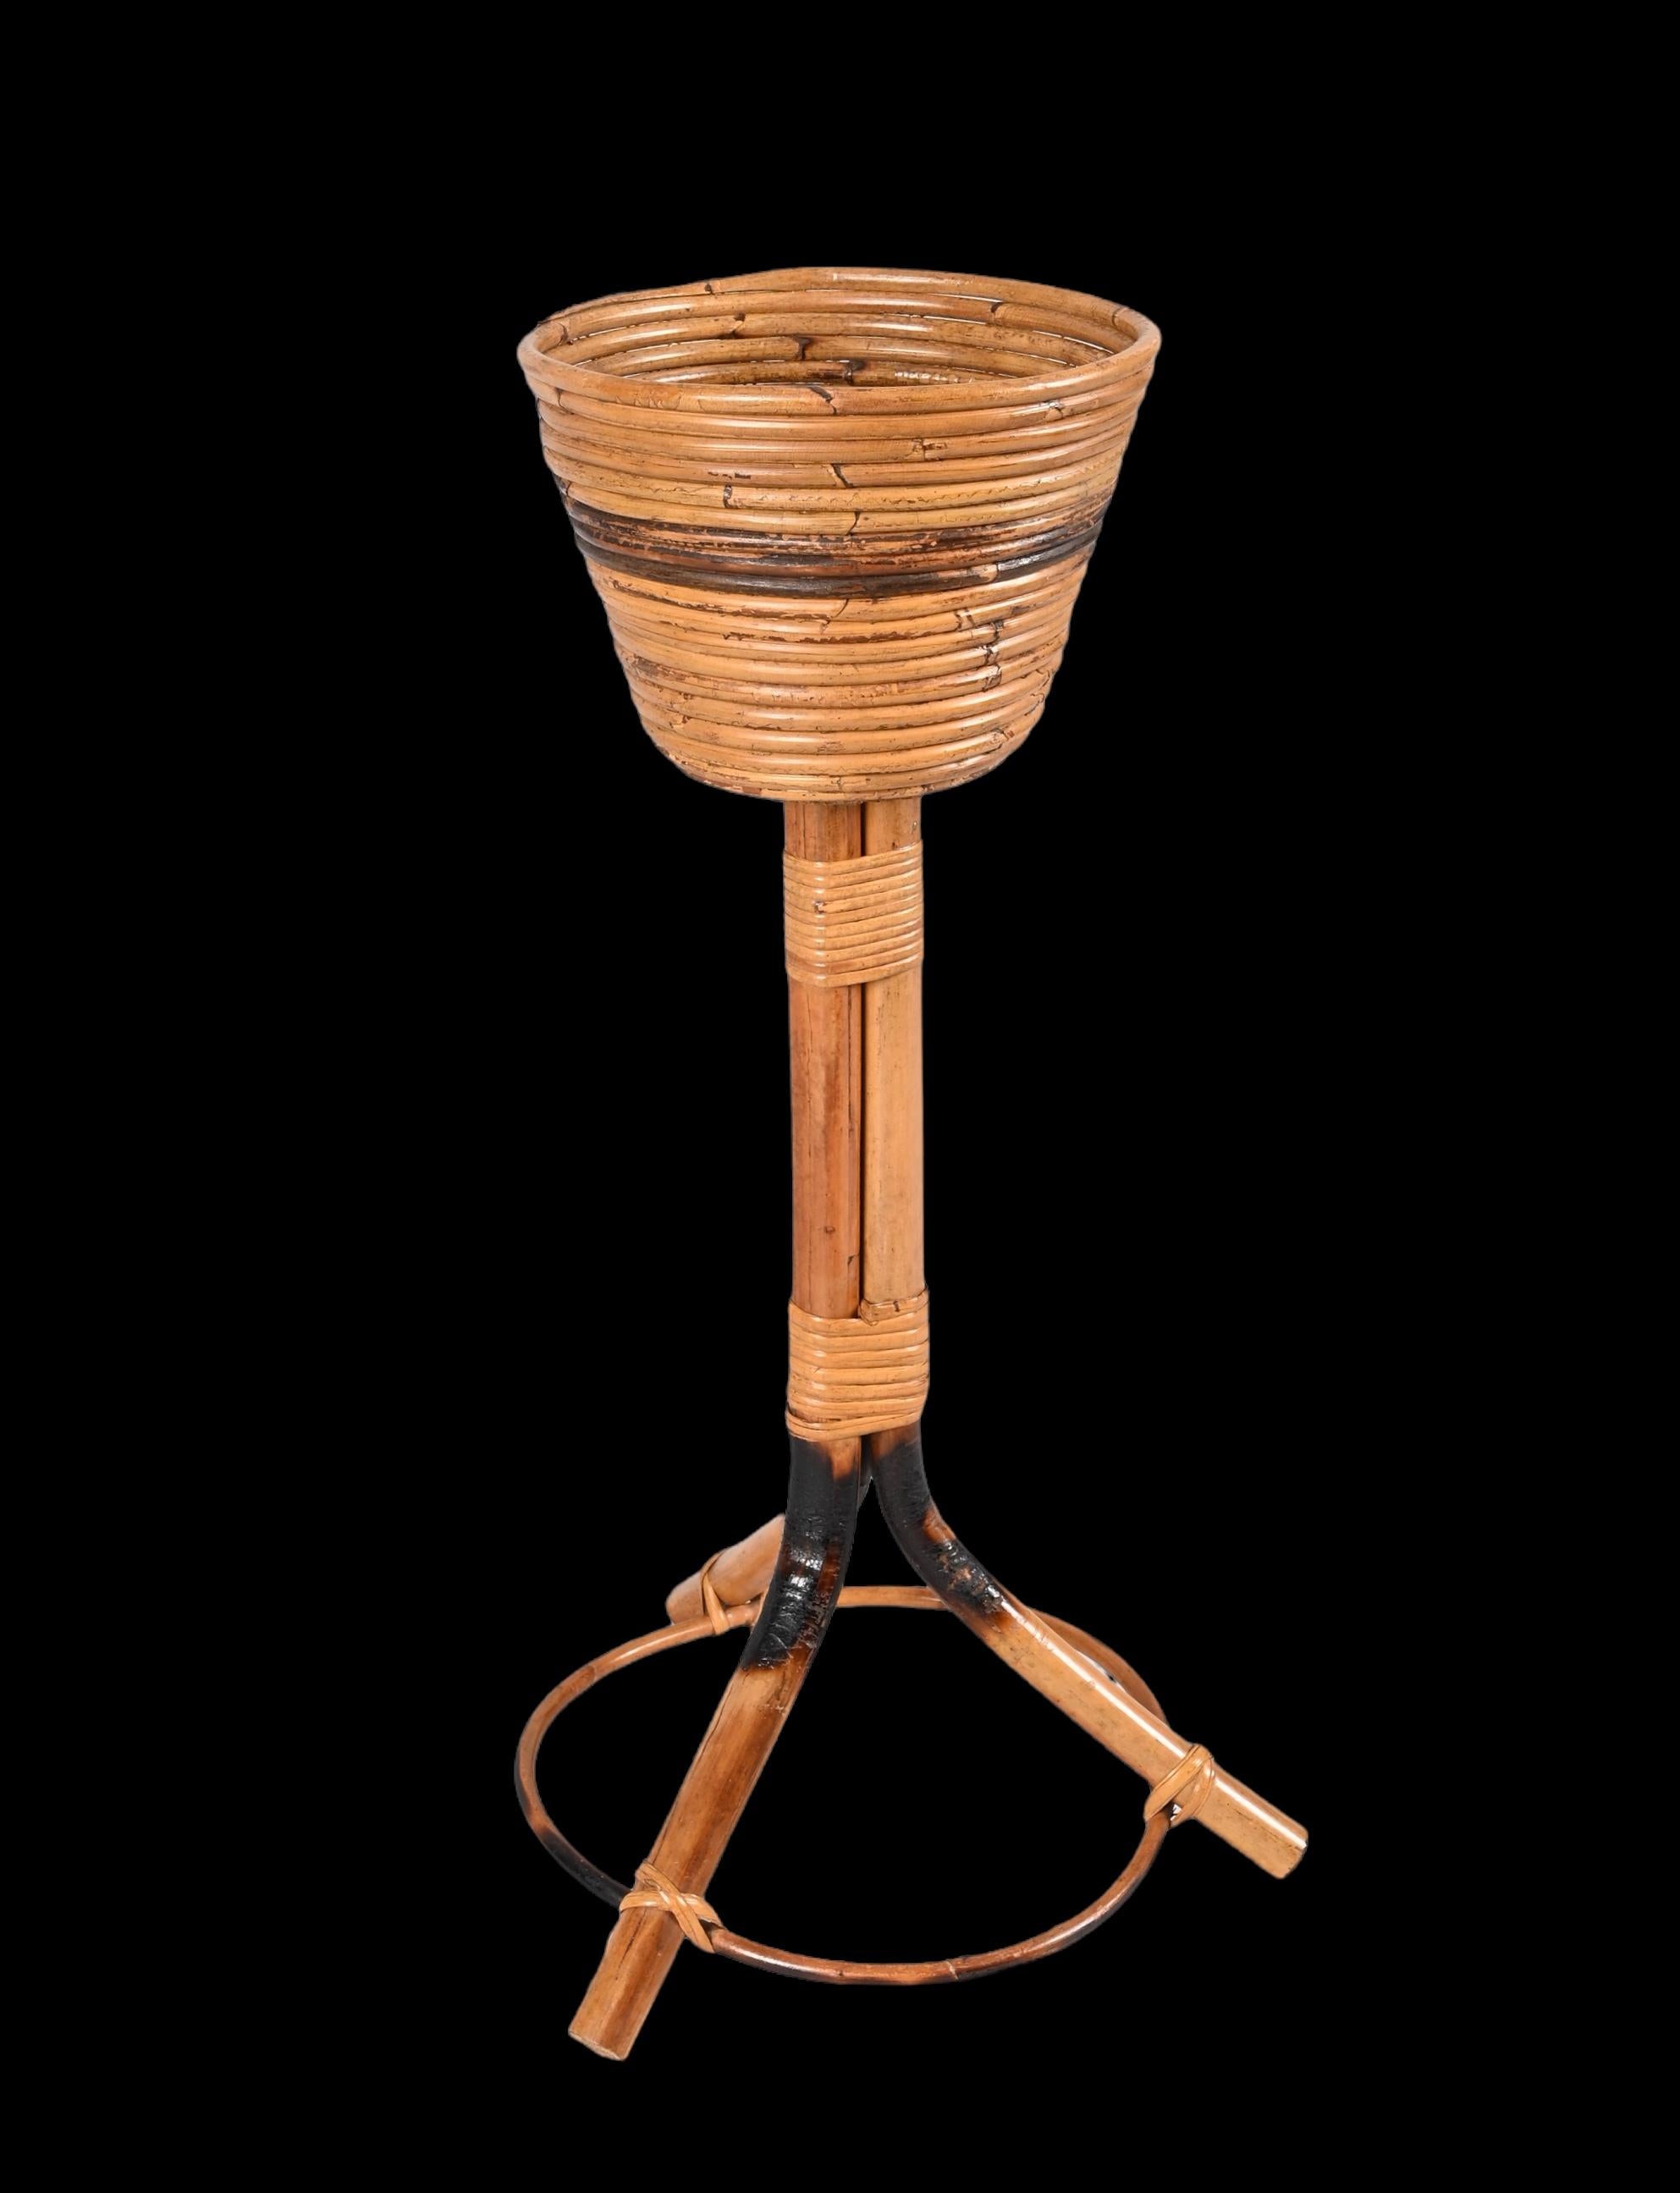 Midcentury Italian Bamboo Cane and Rattan Round Plant Holder, 1950s For Sale 4